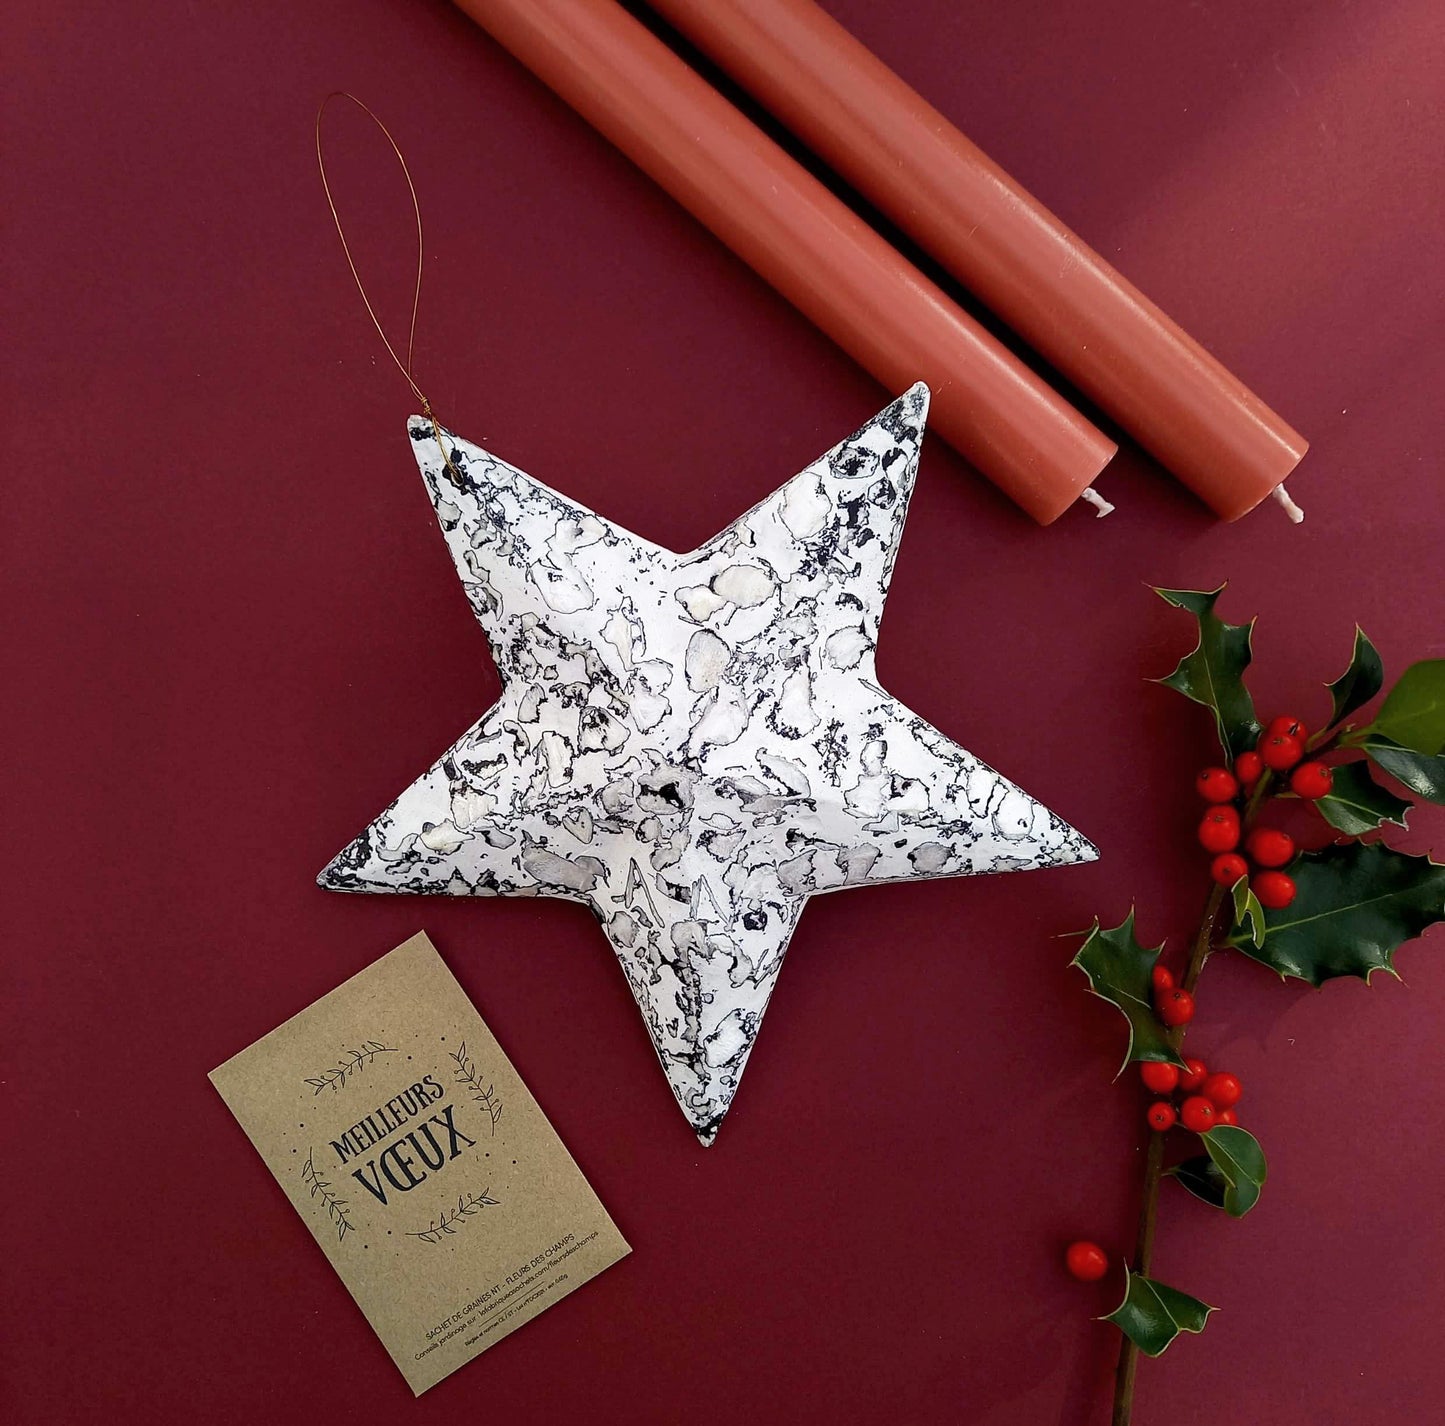 Big Christmas Star handcrafted capiz pulp - Unik by Nature